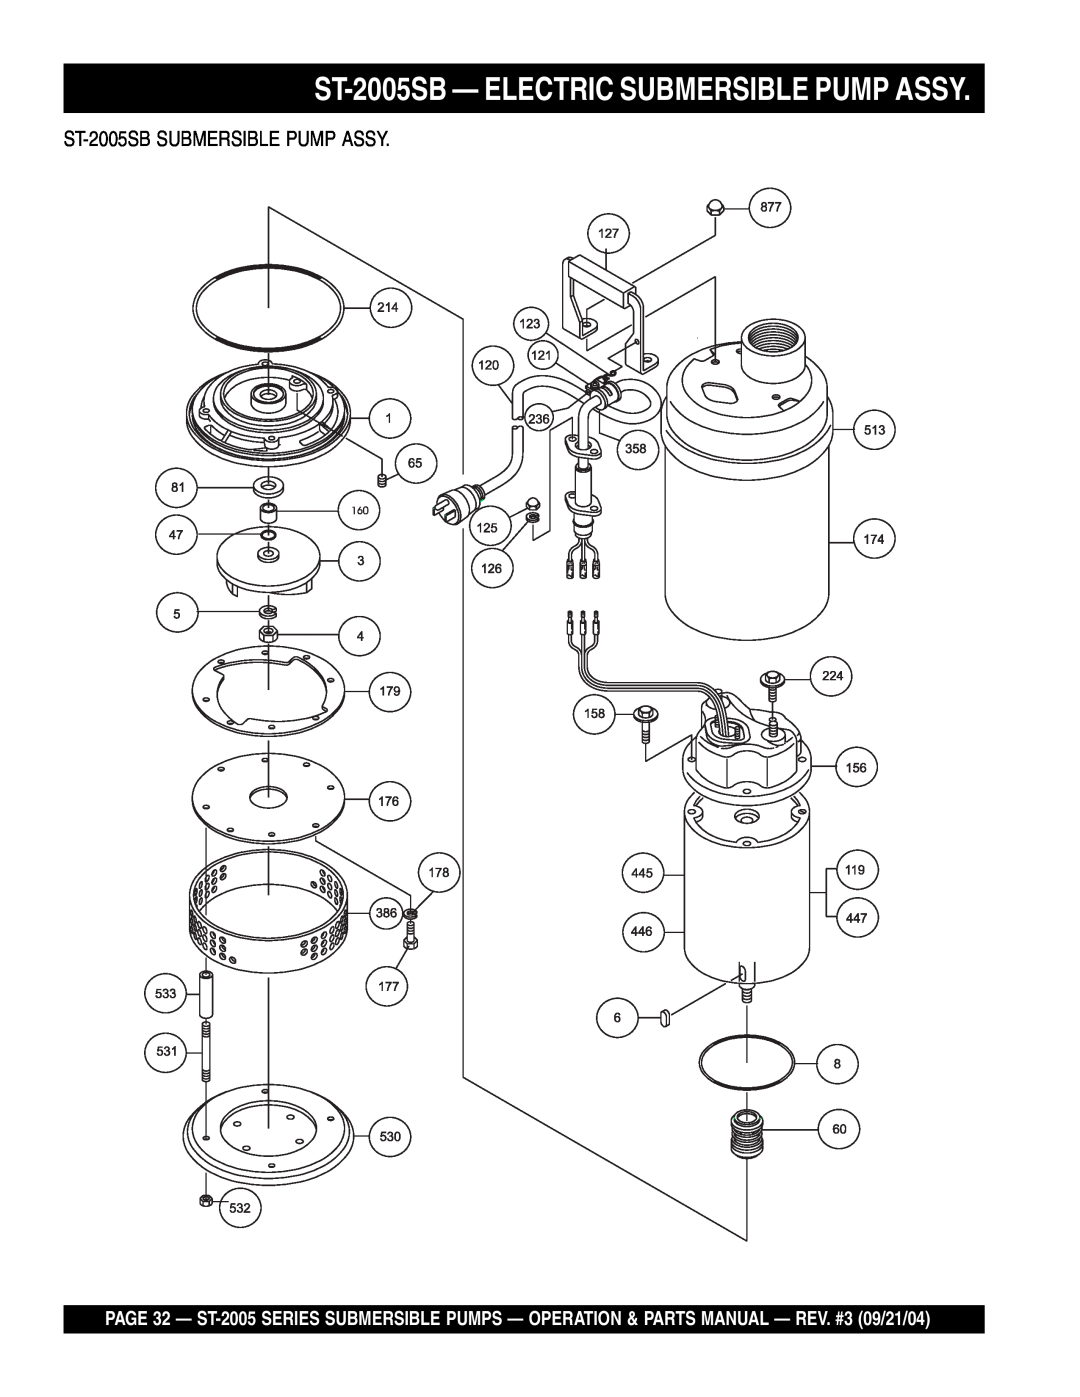 Multiquip manual ST-2005SB - ELECTRIC SUBMERSIBLE PUMP ASSY, ST-2005SB SUBMERSIBLE PUMP ASSY 